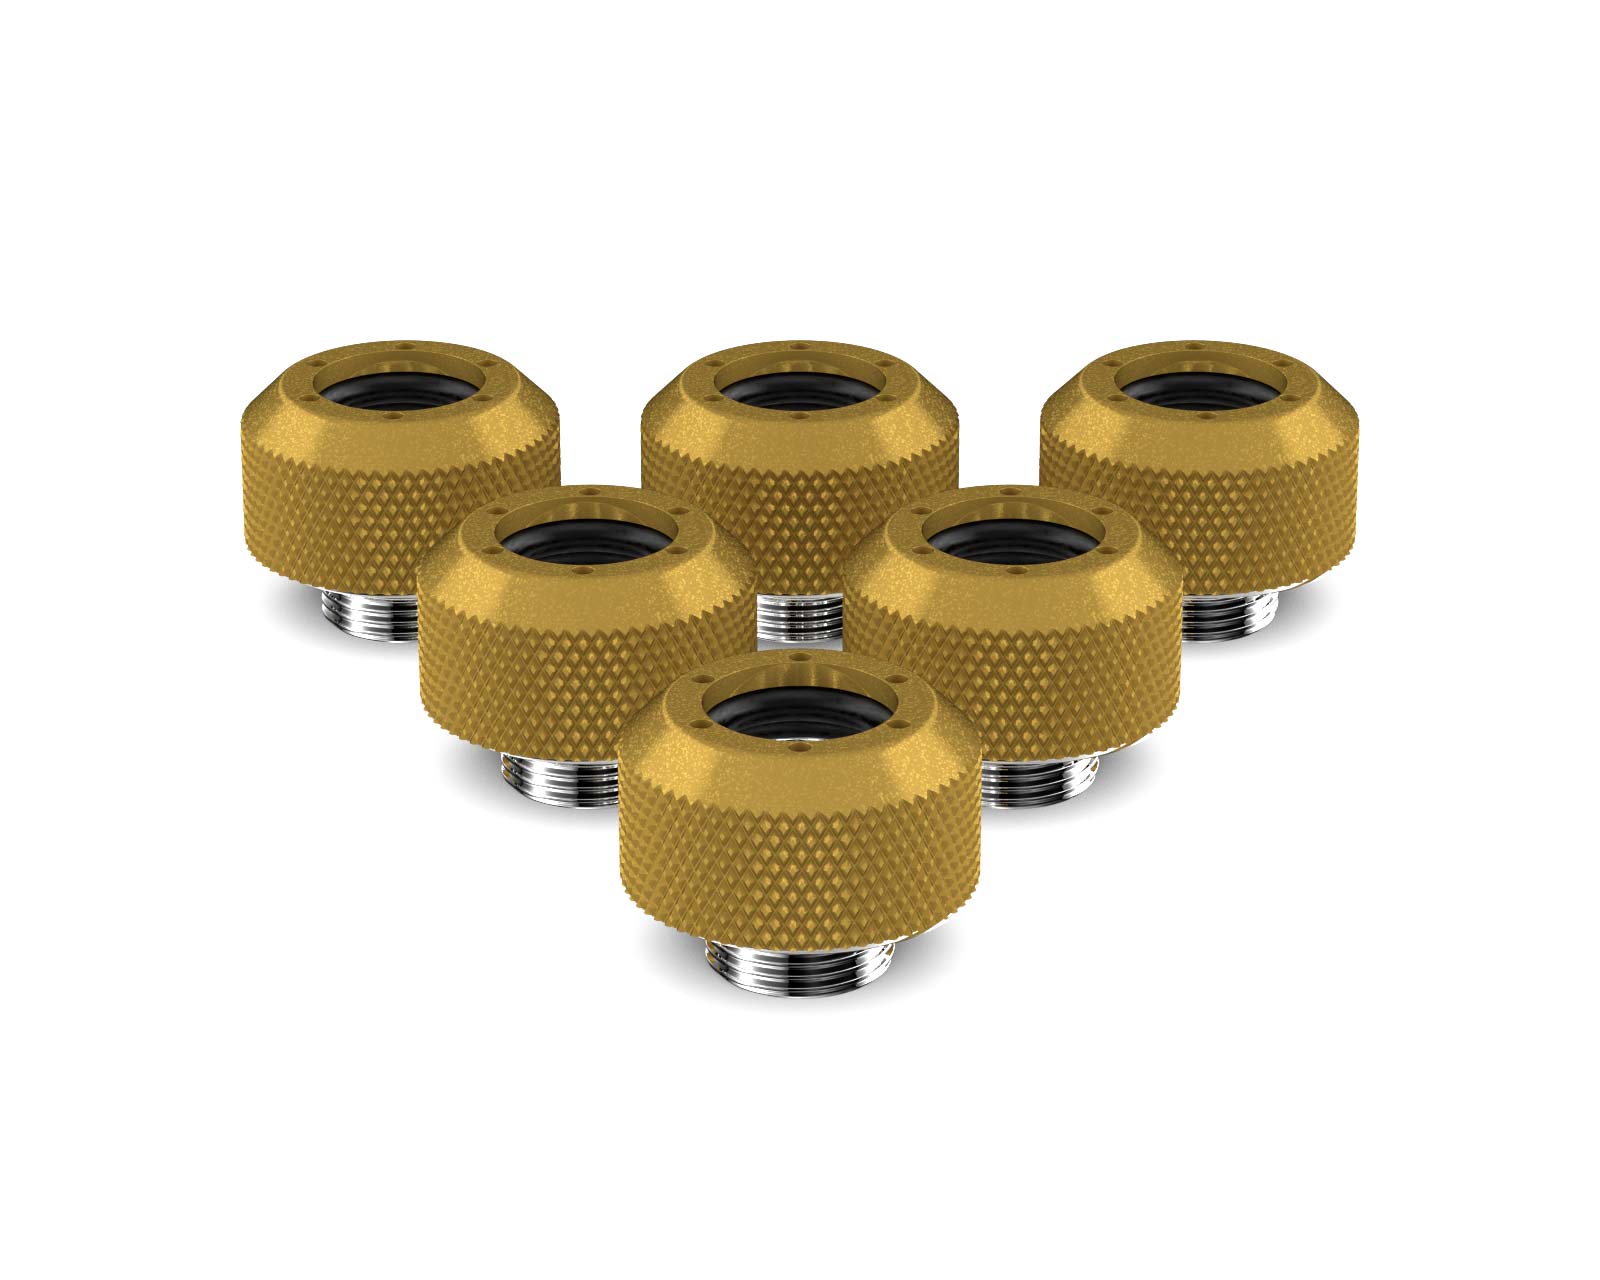 PrimoChill 1/2in. Rigid RevolverSX Series Fitting - 6 pack - PrimoChill - KEEPING IT COOL Gold